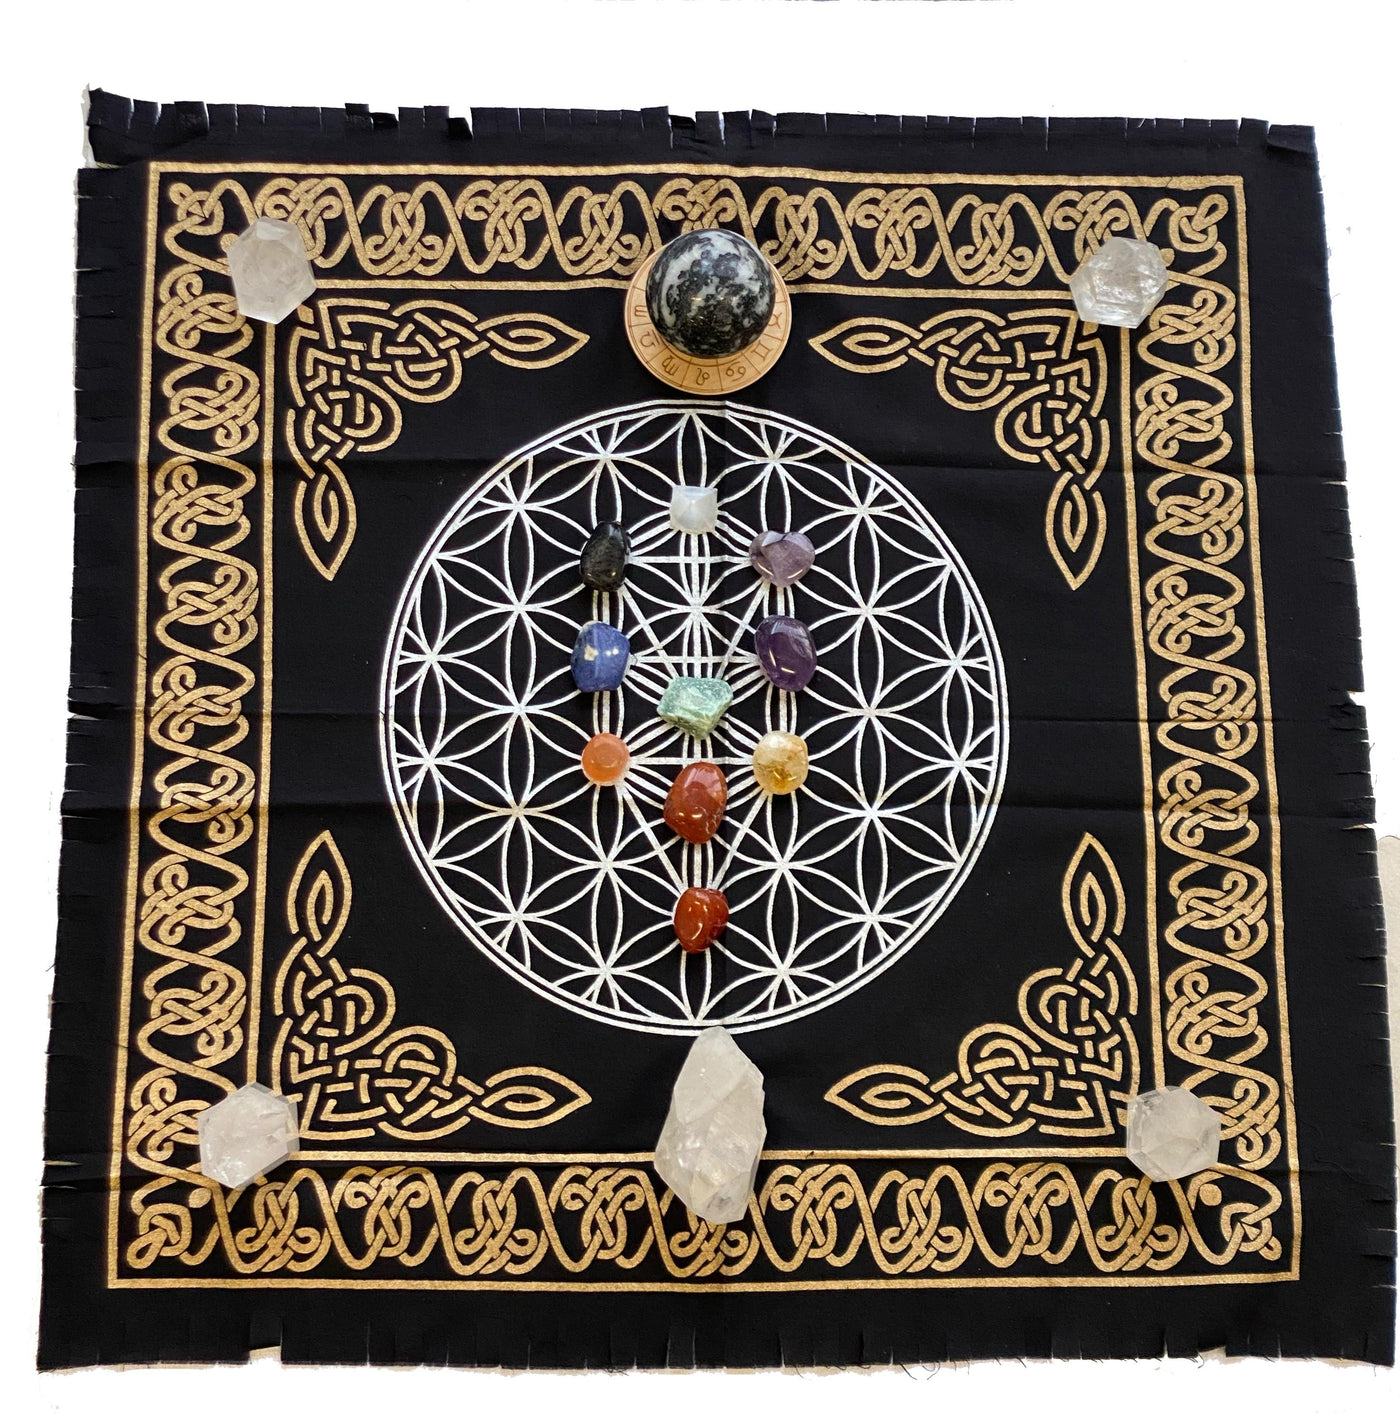 flower of life alter grid.  It is black with a white grid imprinted on it and gold borders and corners.